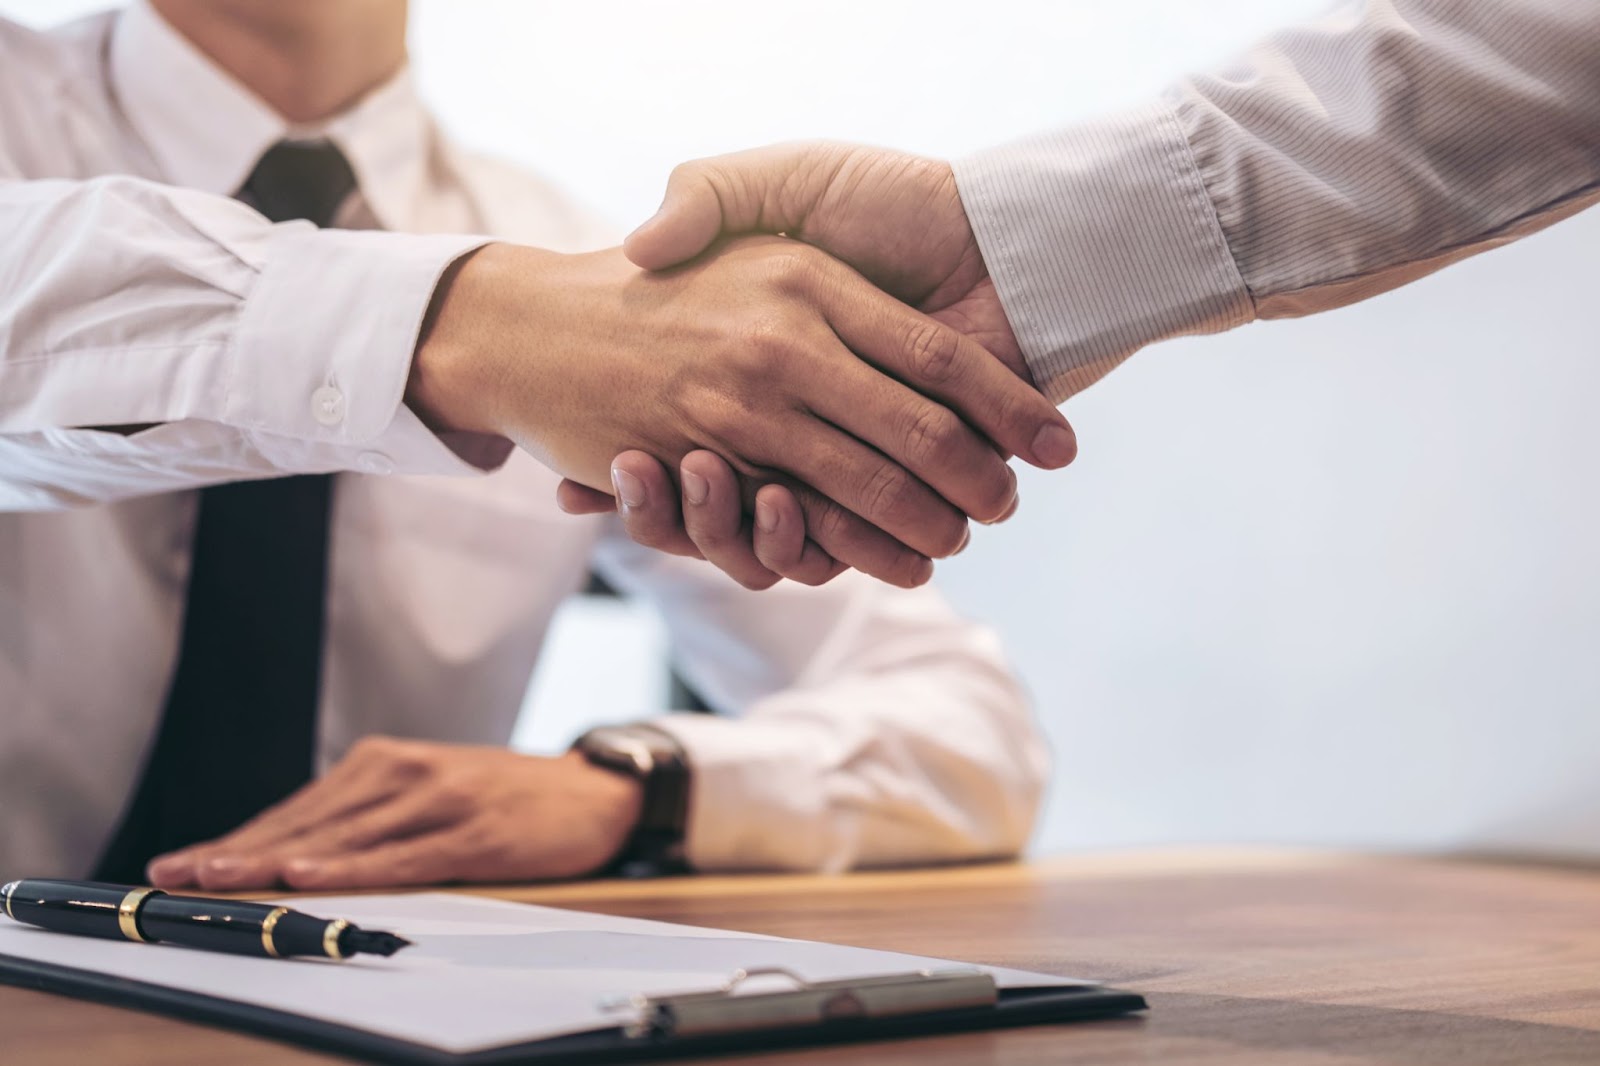 Two business professionals shaking hands across a desk in an office setting.